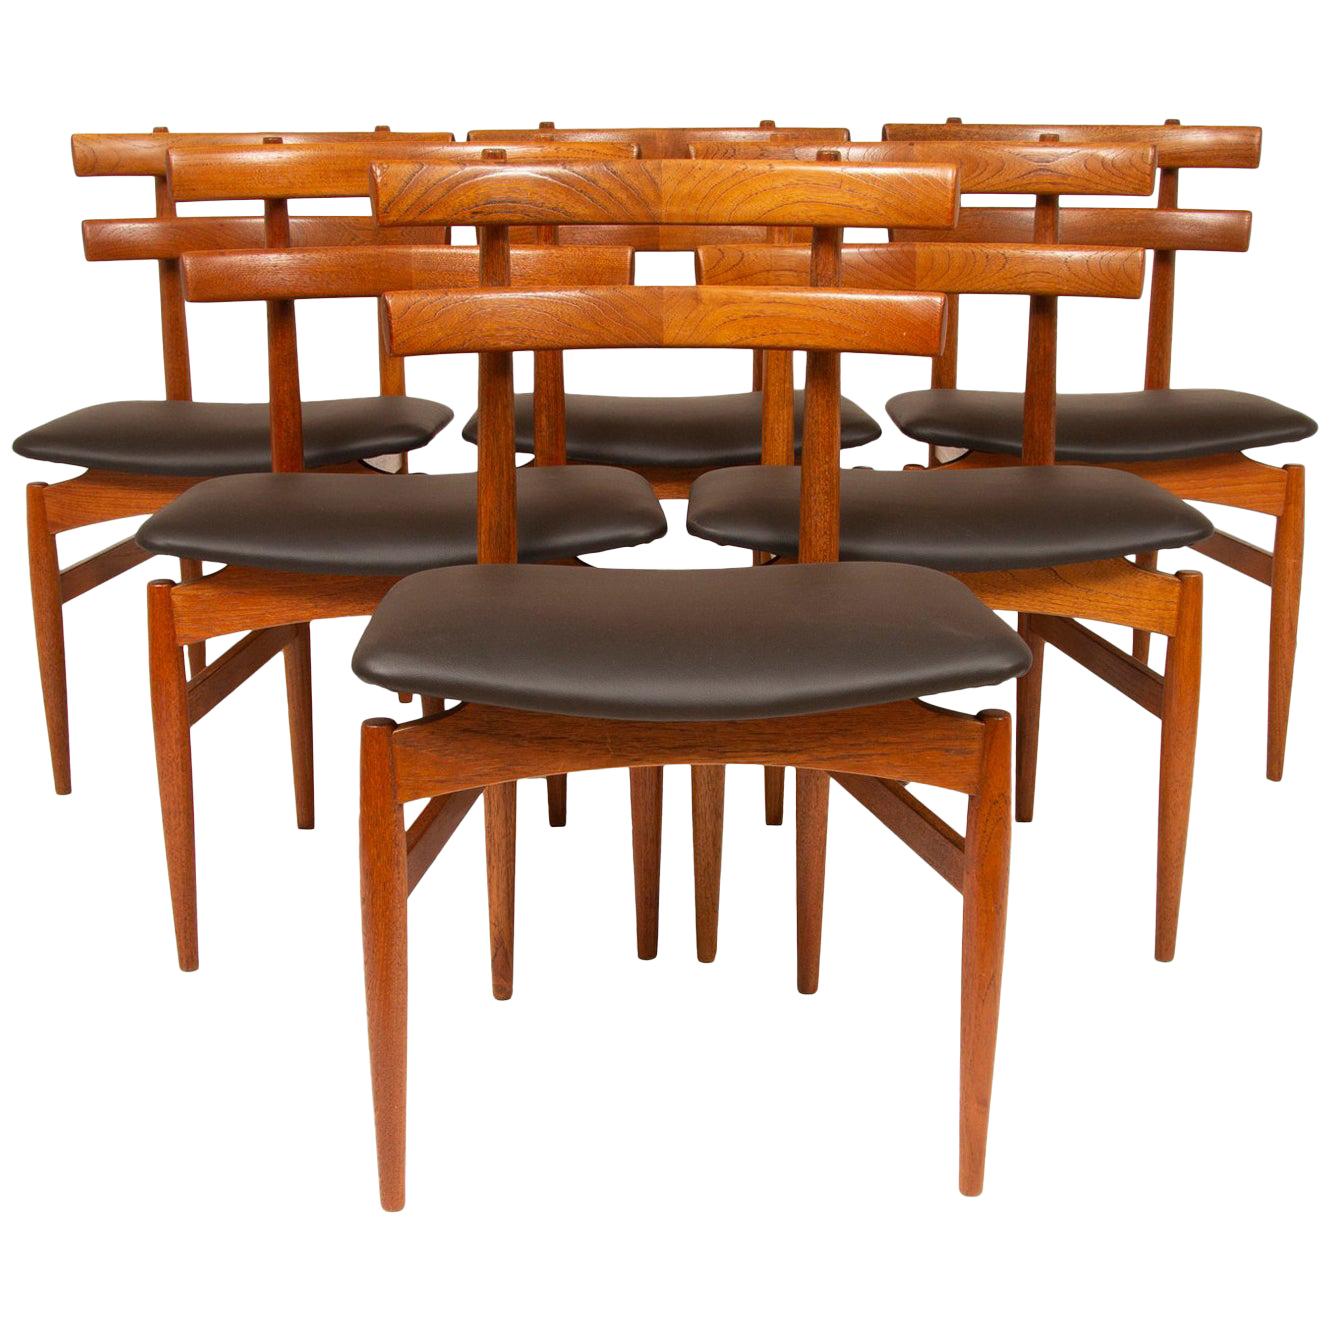 Set of 6 1950s Mid Century Poul Hundevad Teak & Leather Model 30 Dining Chairs